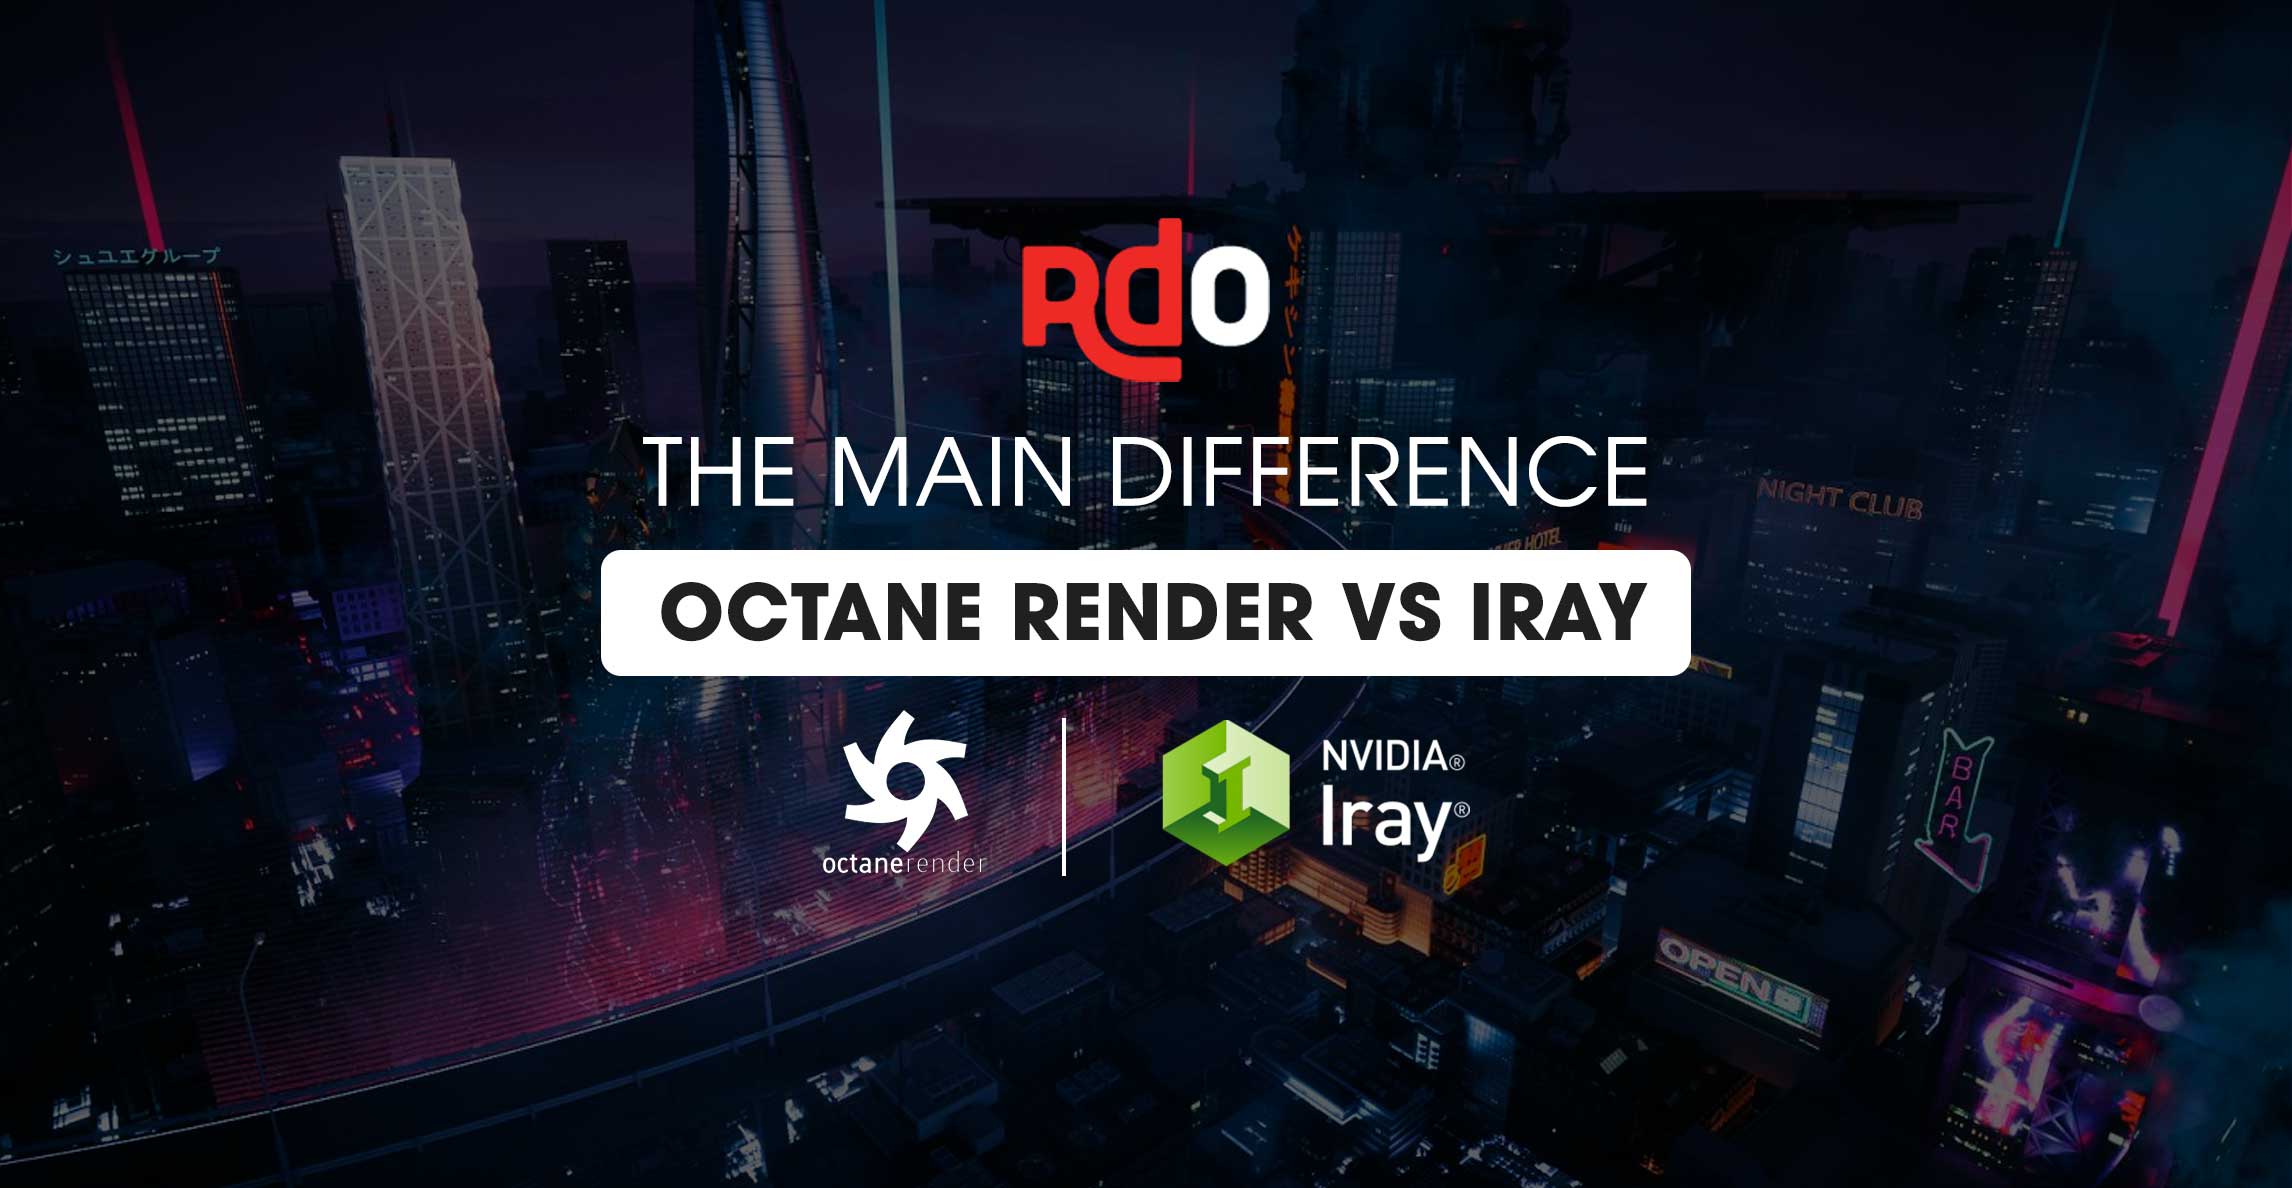 The main difference between Octane Render vs IRay